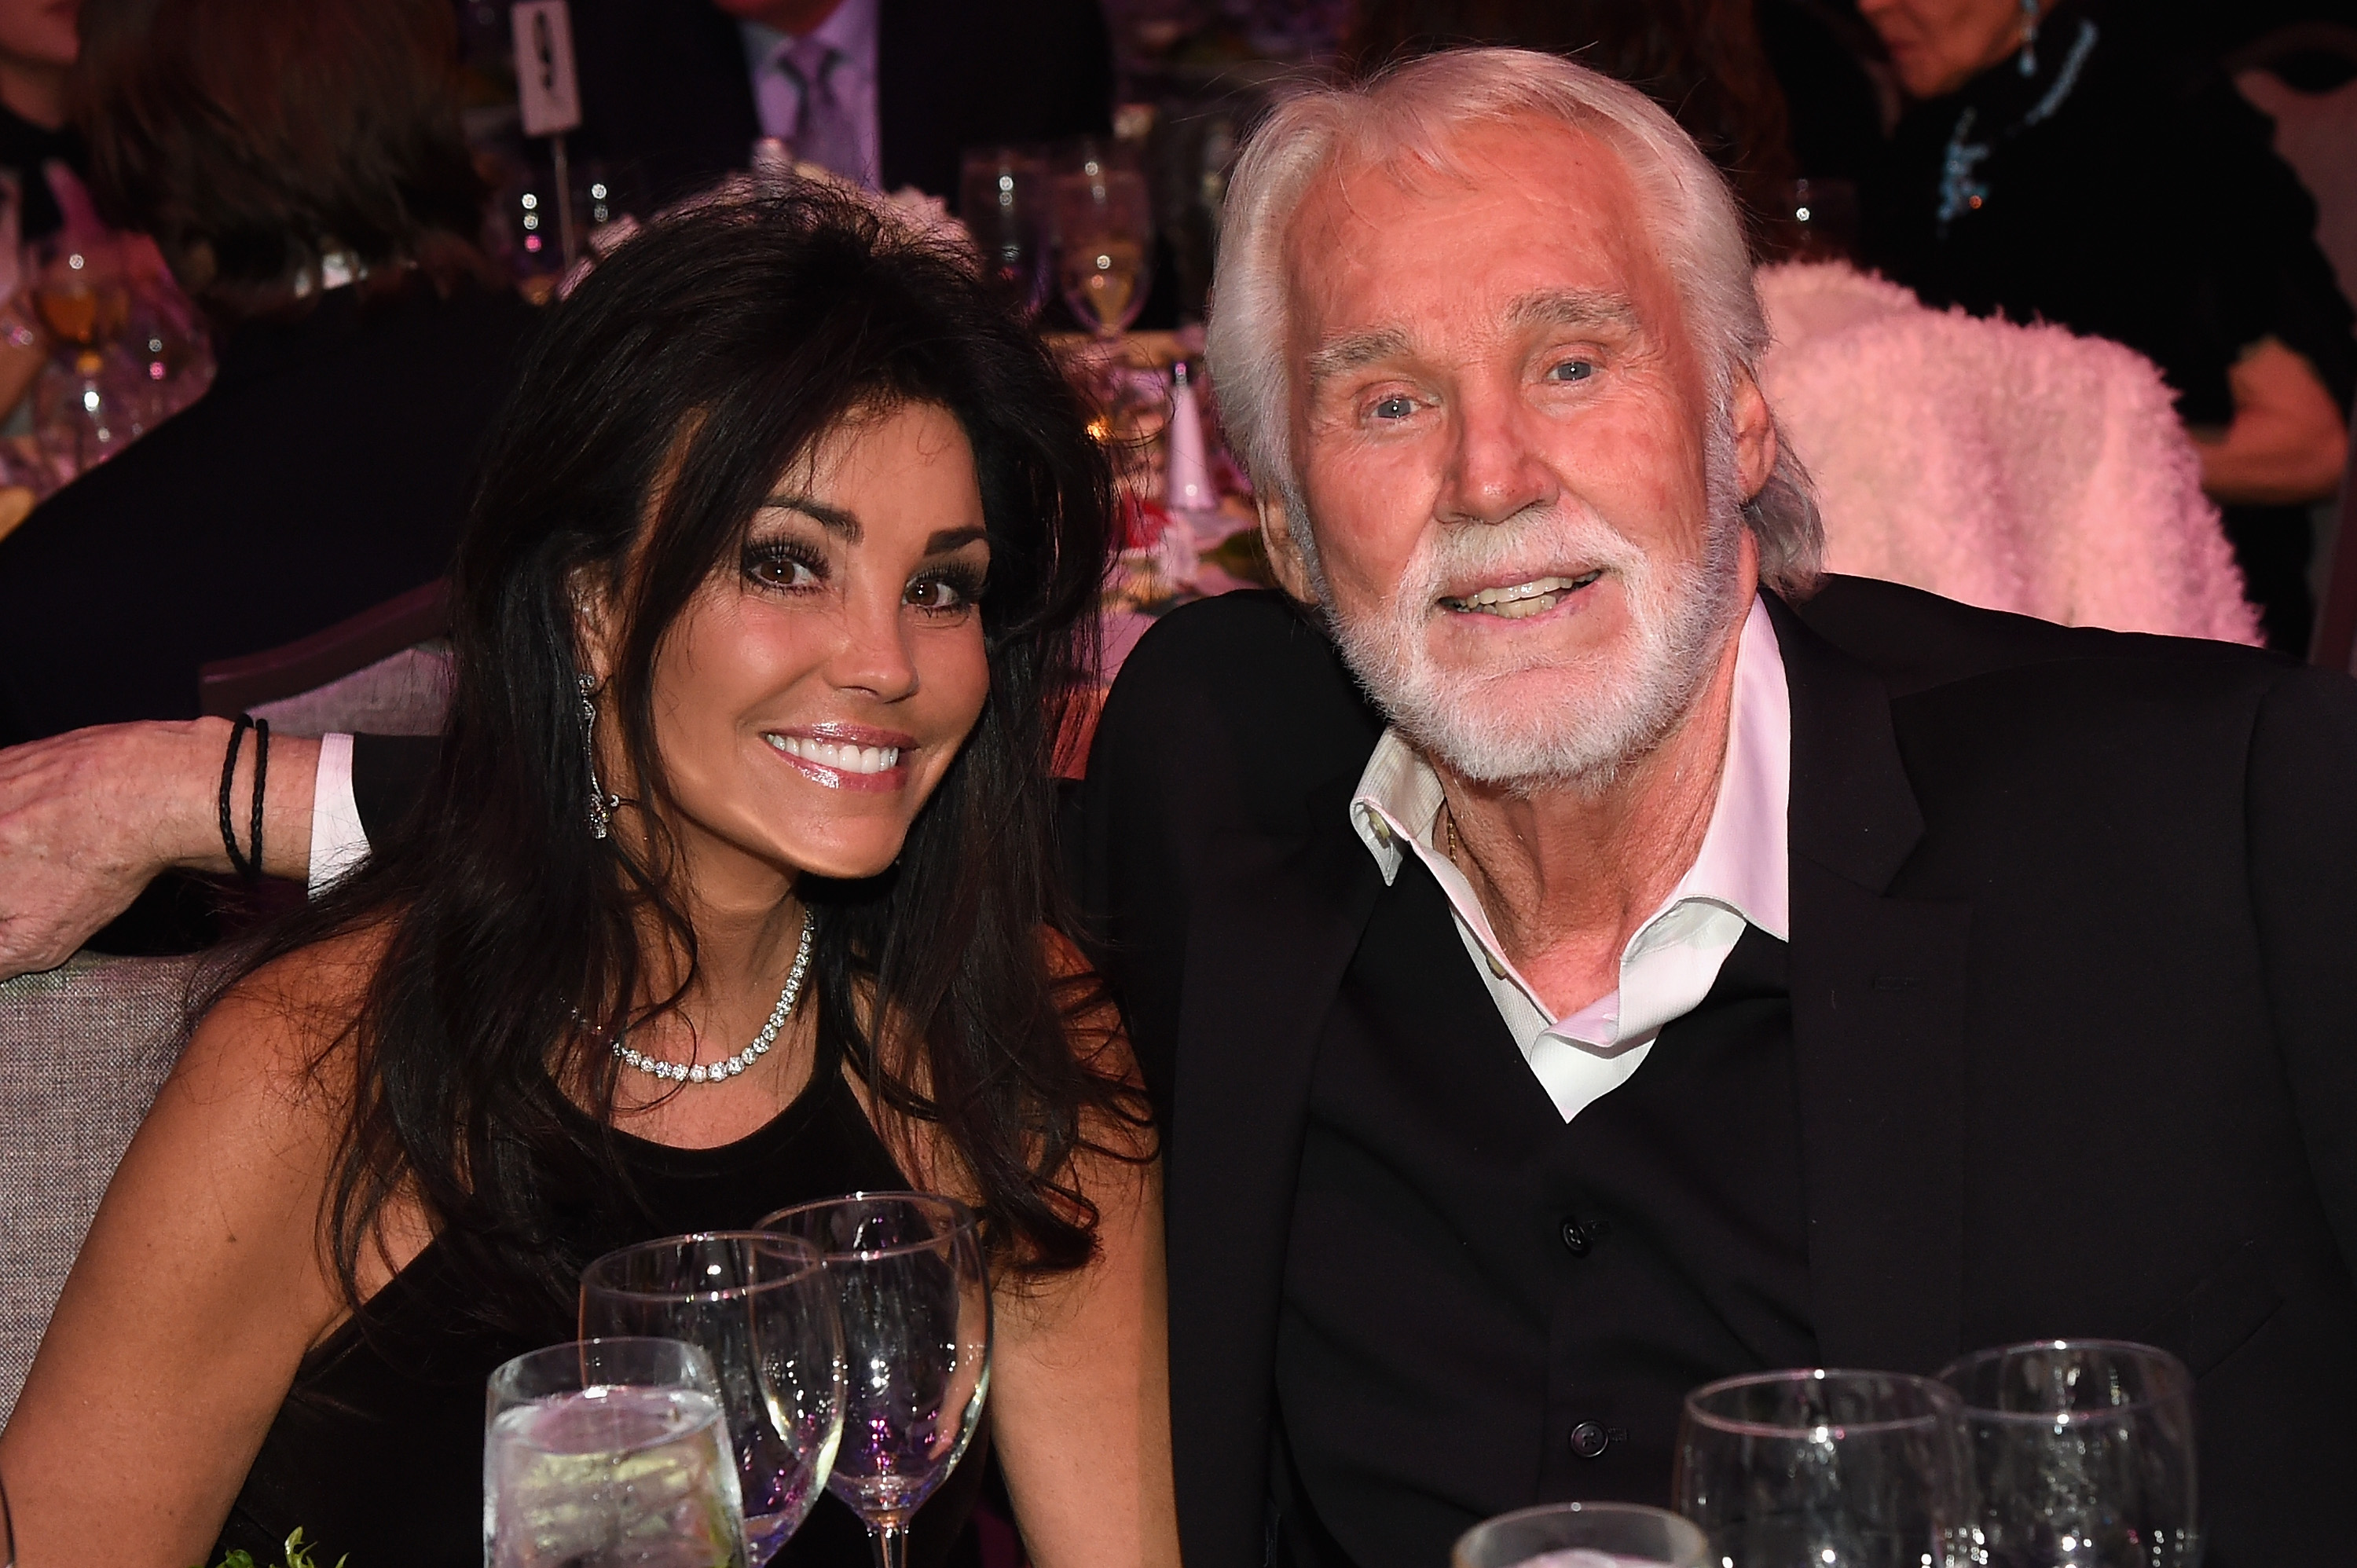 Kenny Rogers Proposed to His Wife, Wanda Miller, in an Unexpected Way